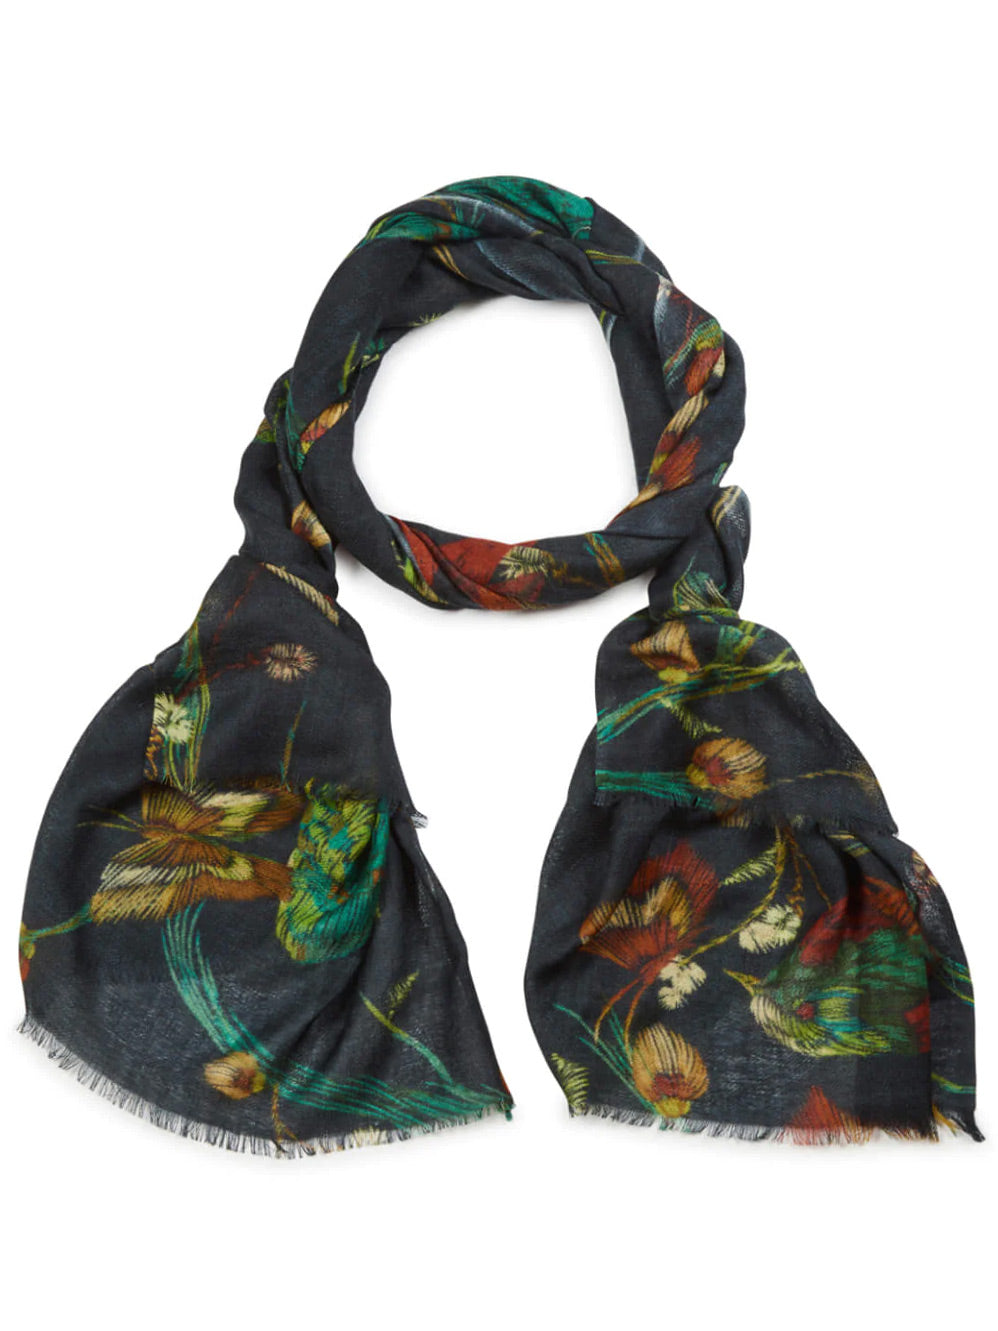 THE SCARF COMPANY BETSY WOOL SCARF